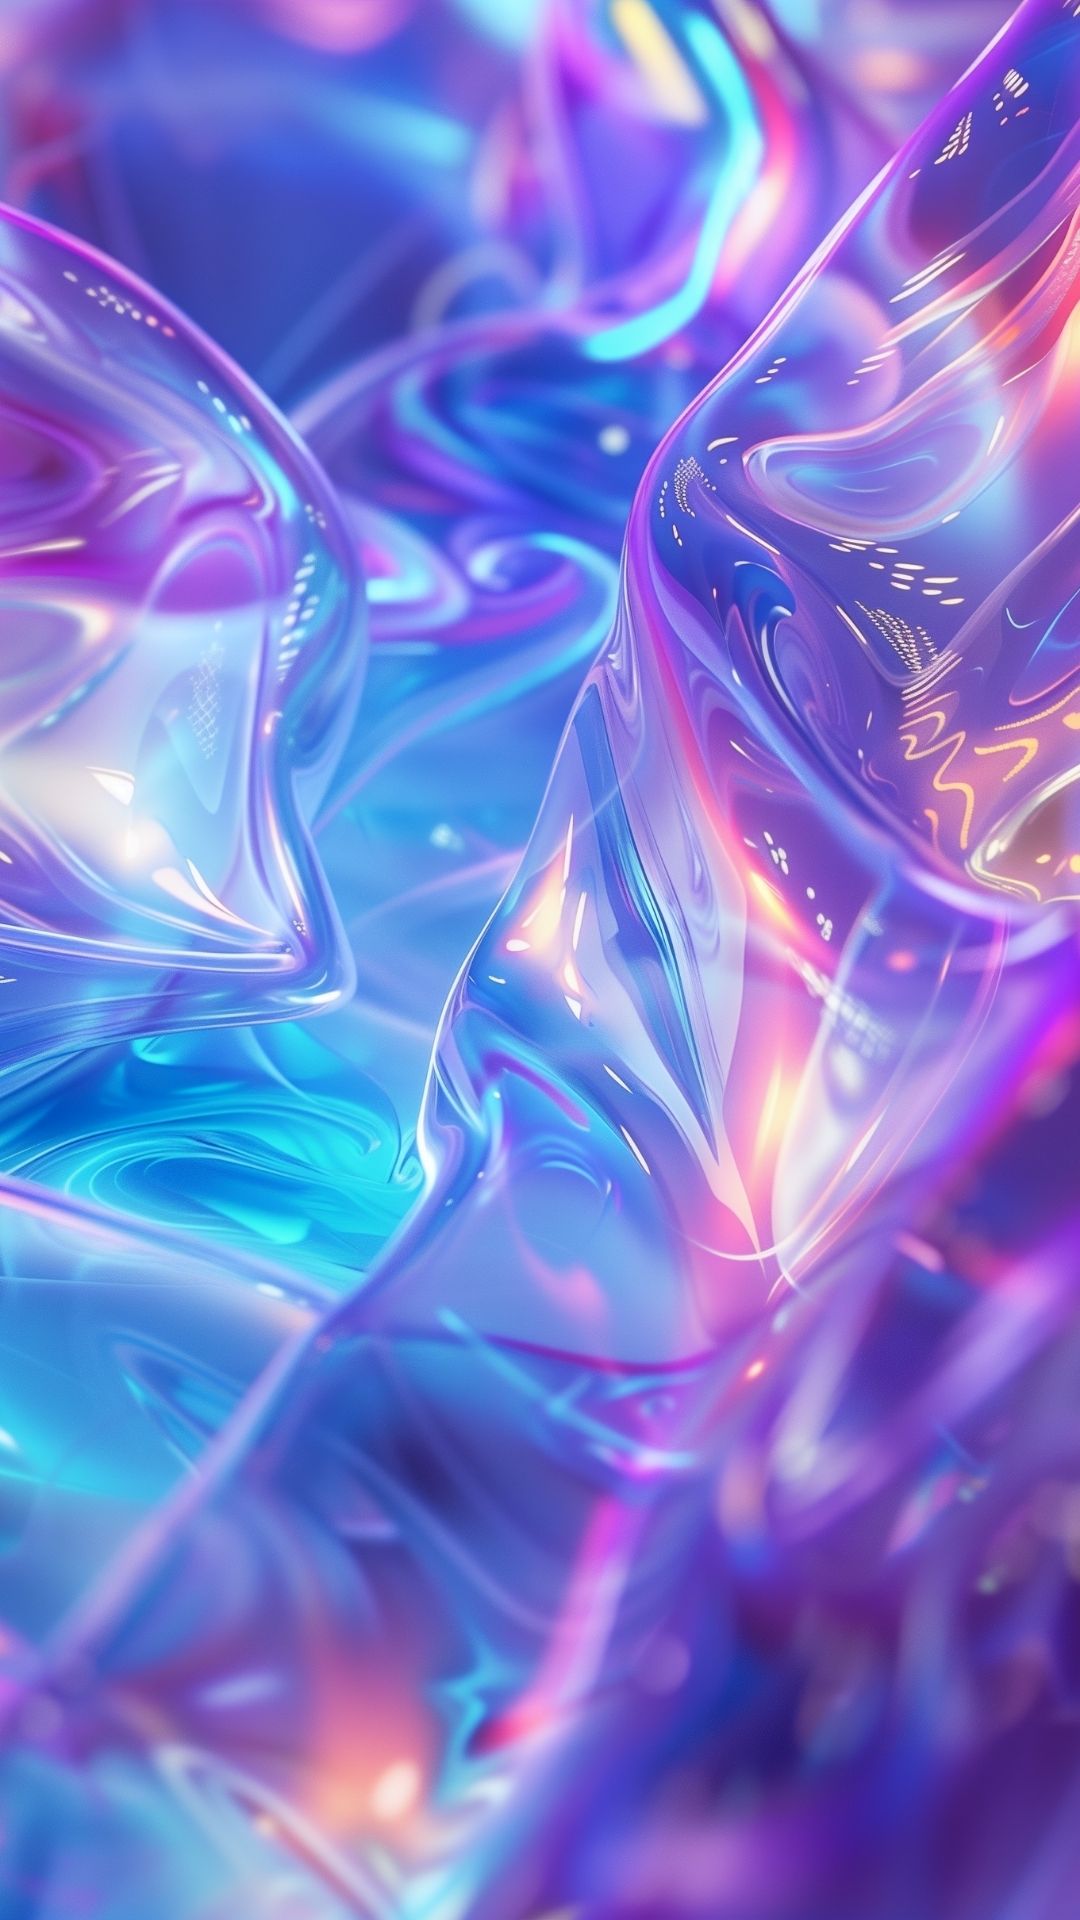 Indulge Your Iridescent Aesthetic Obsession 25 Shimmering Images Await - Sprinkle of AI Iridescent iPhone Wallpapers